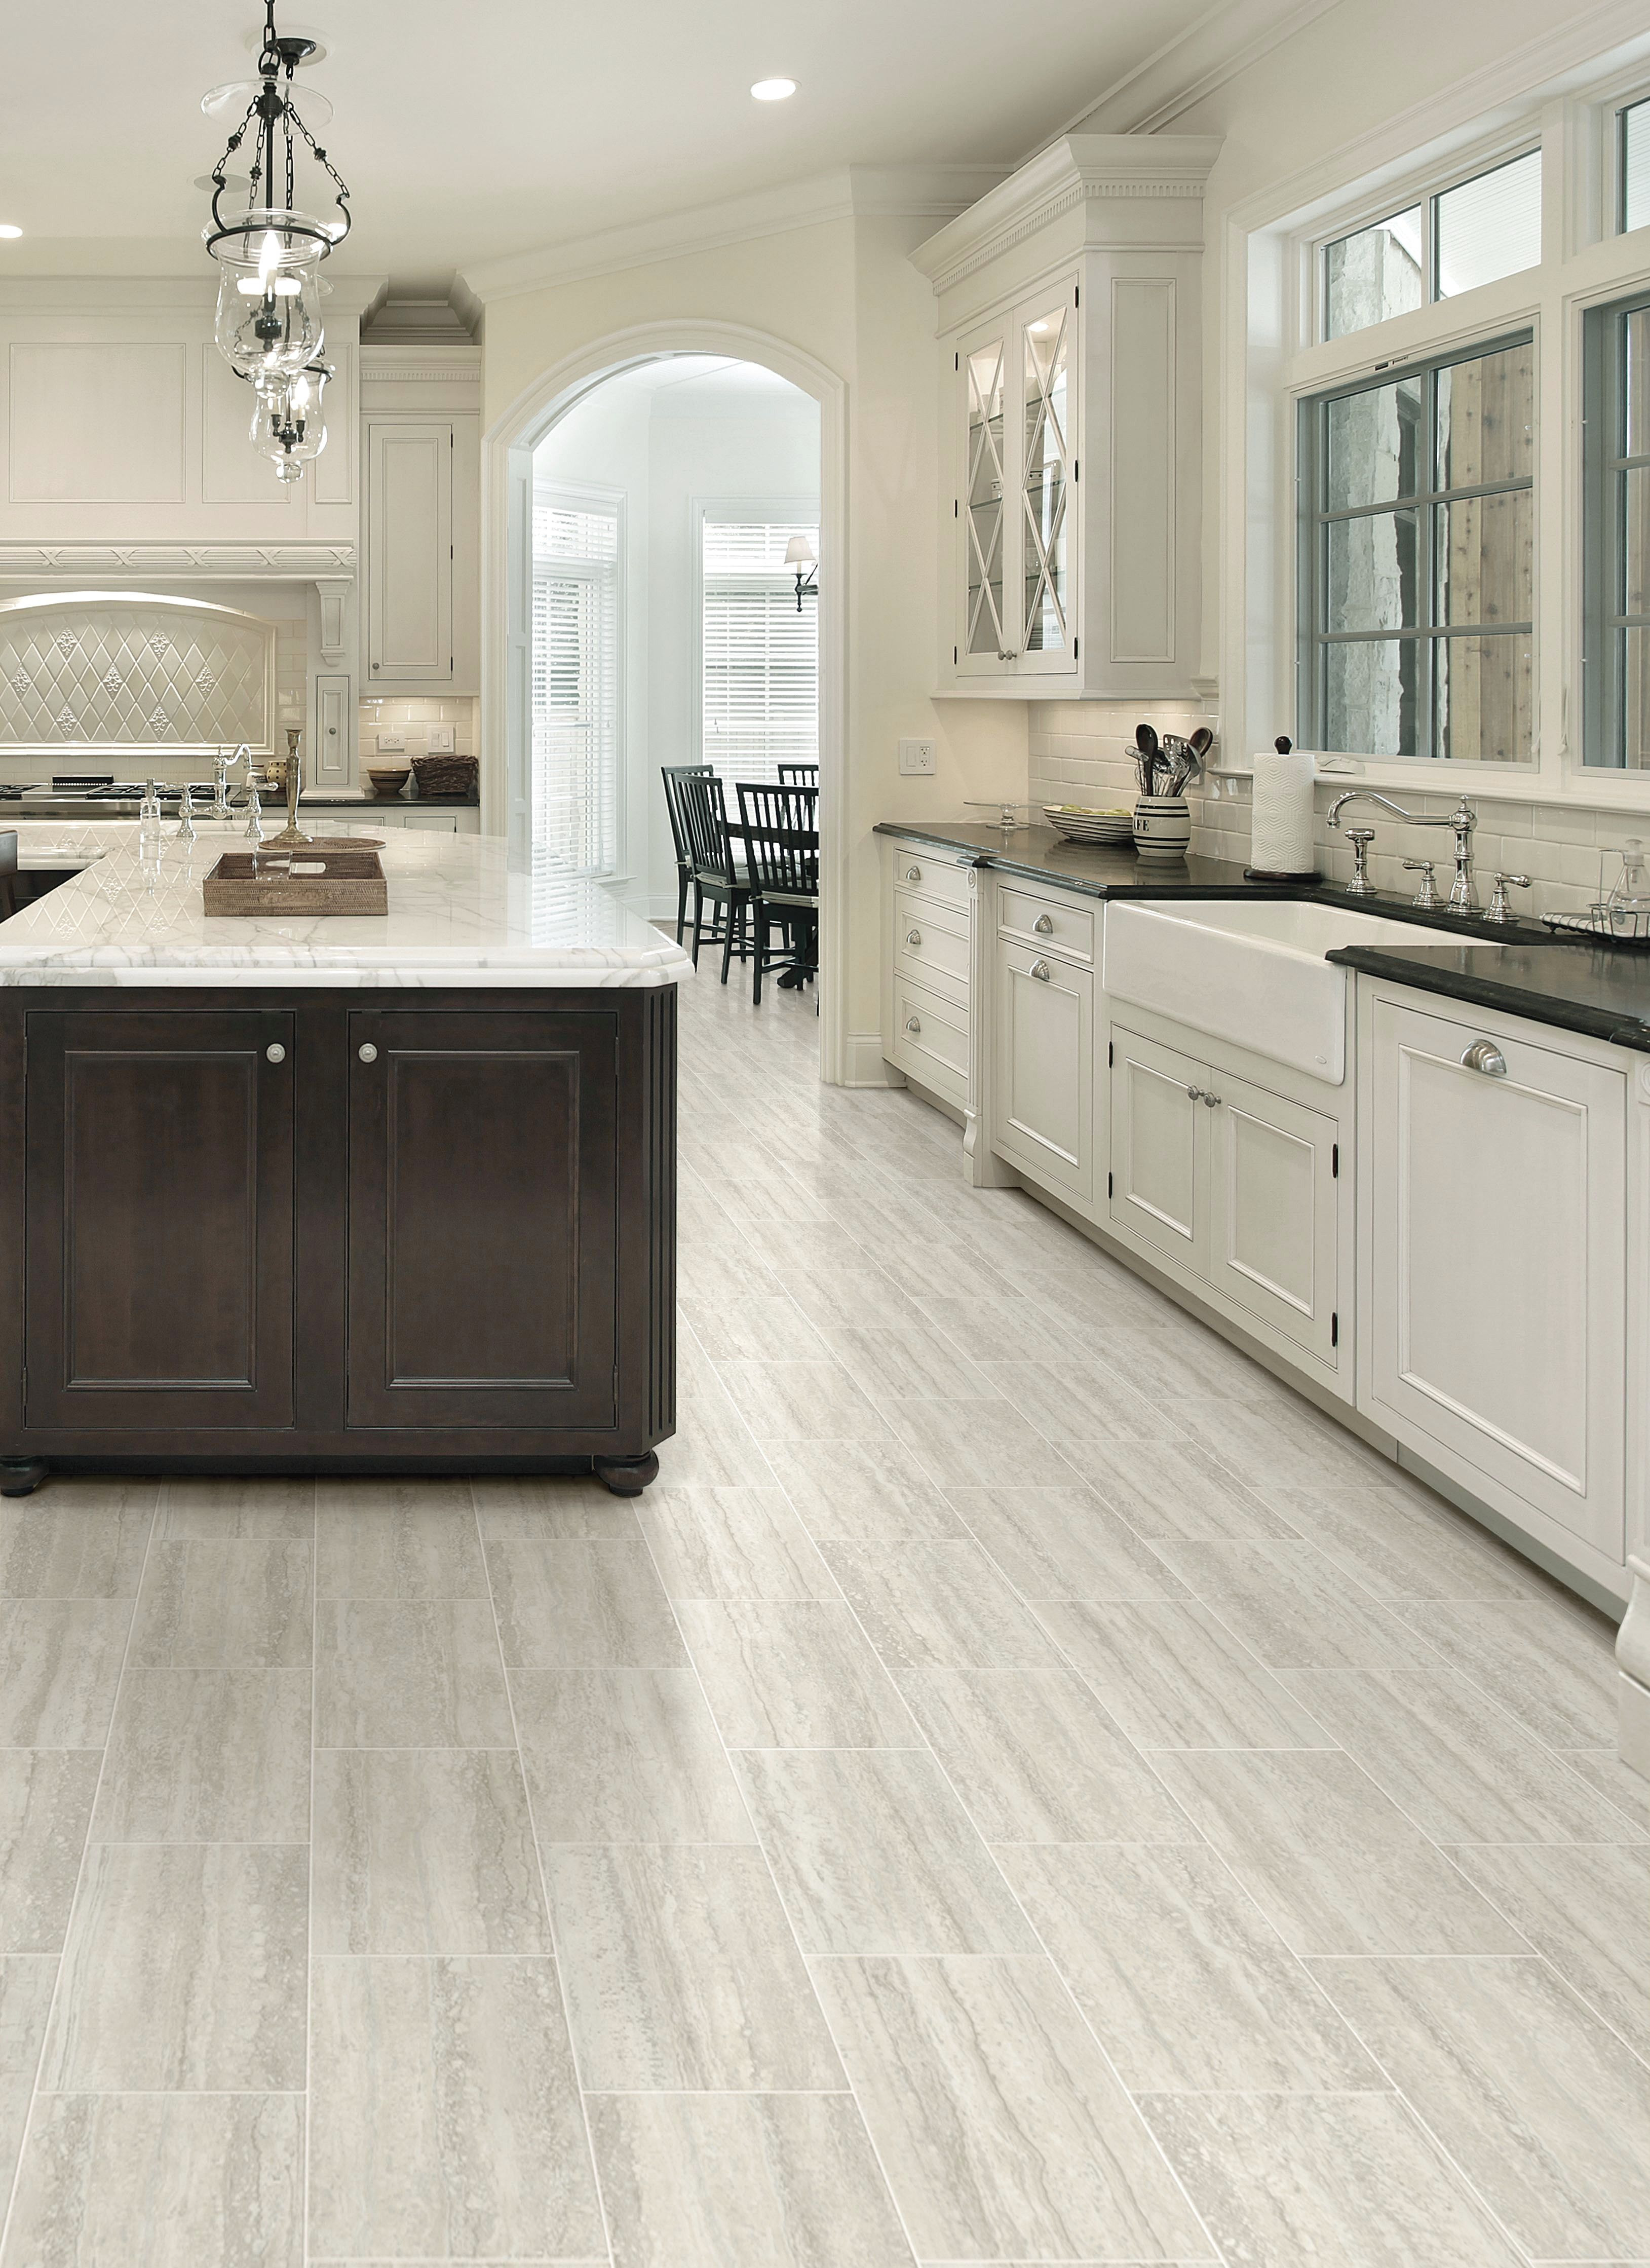 21 Wonderful Hardwood Floor Refinishing Nj Costs 2024 free download hardwood floor refinishing nj costs of stone flooring cost all about kitchen in 2018 pinterest throughout stone flooring cost